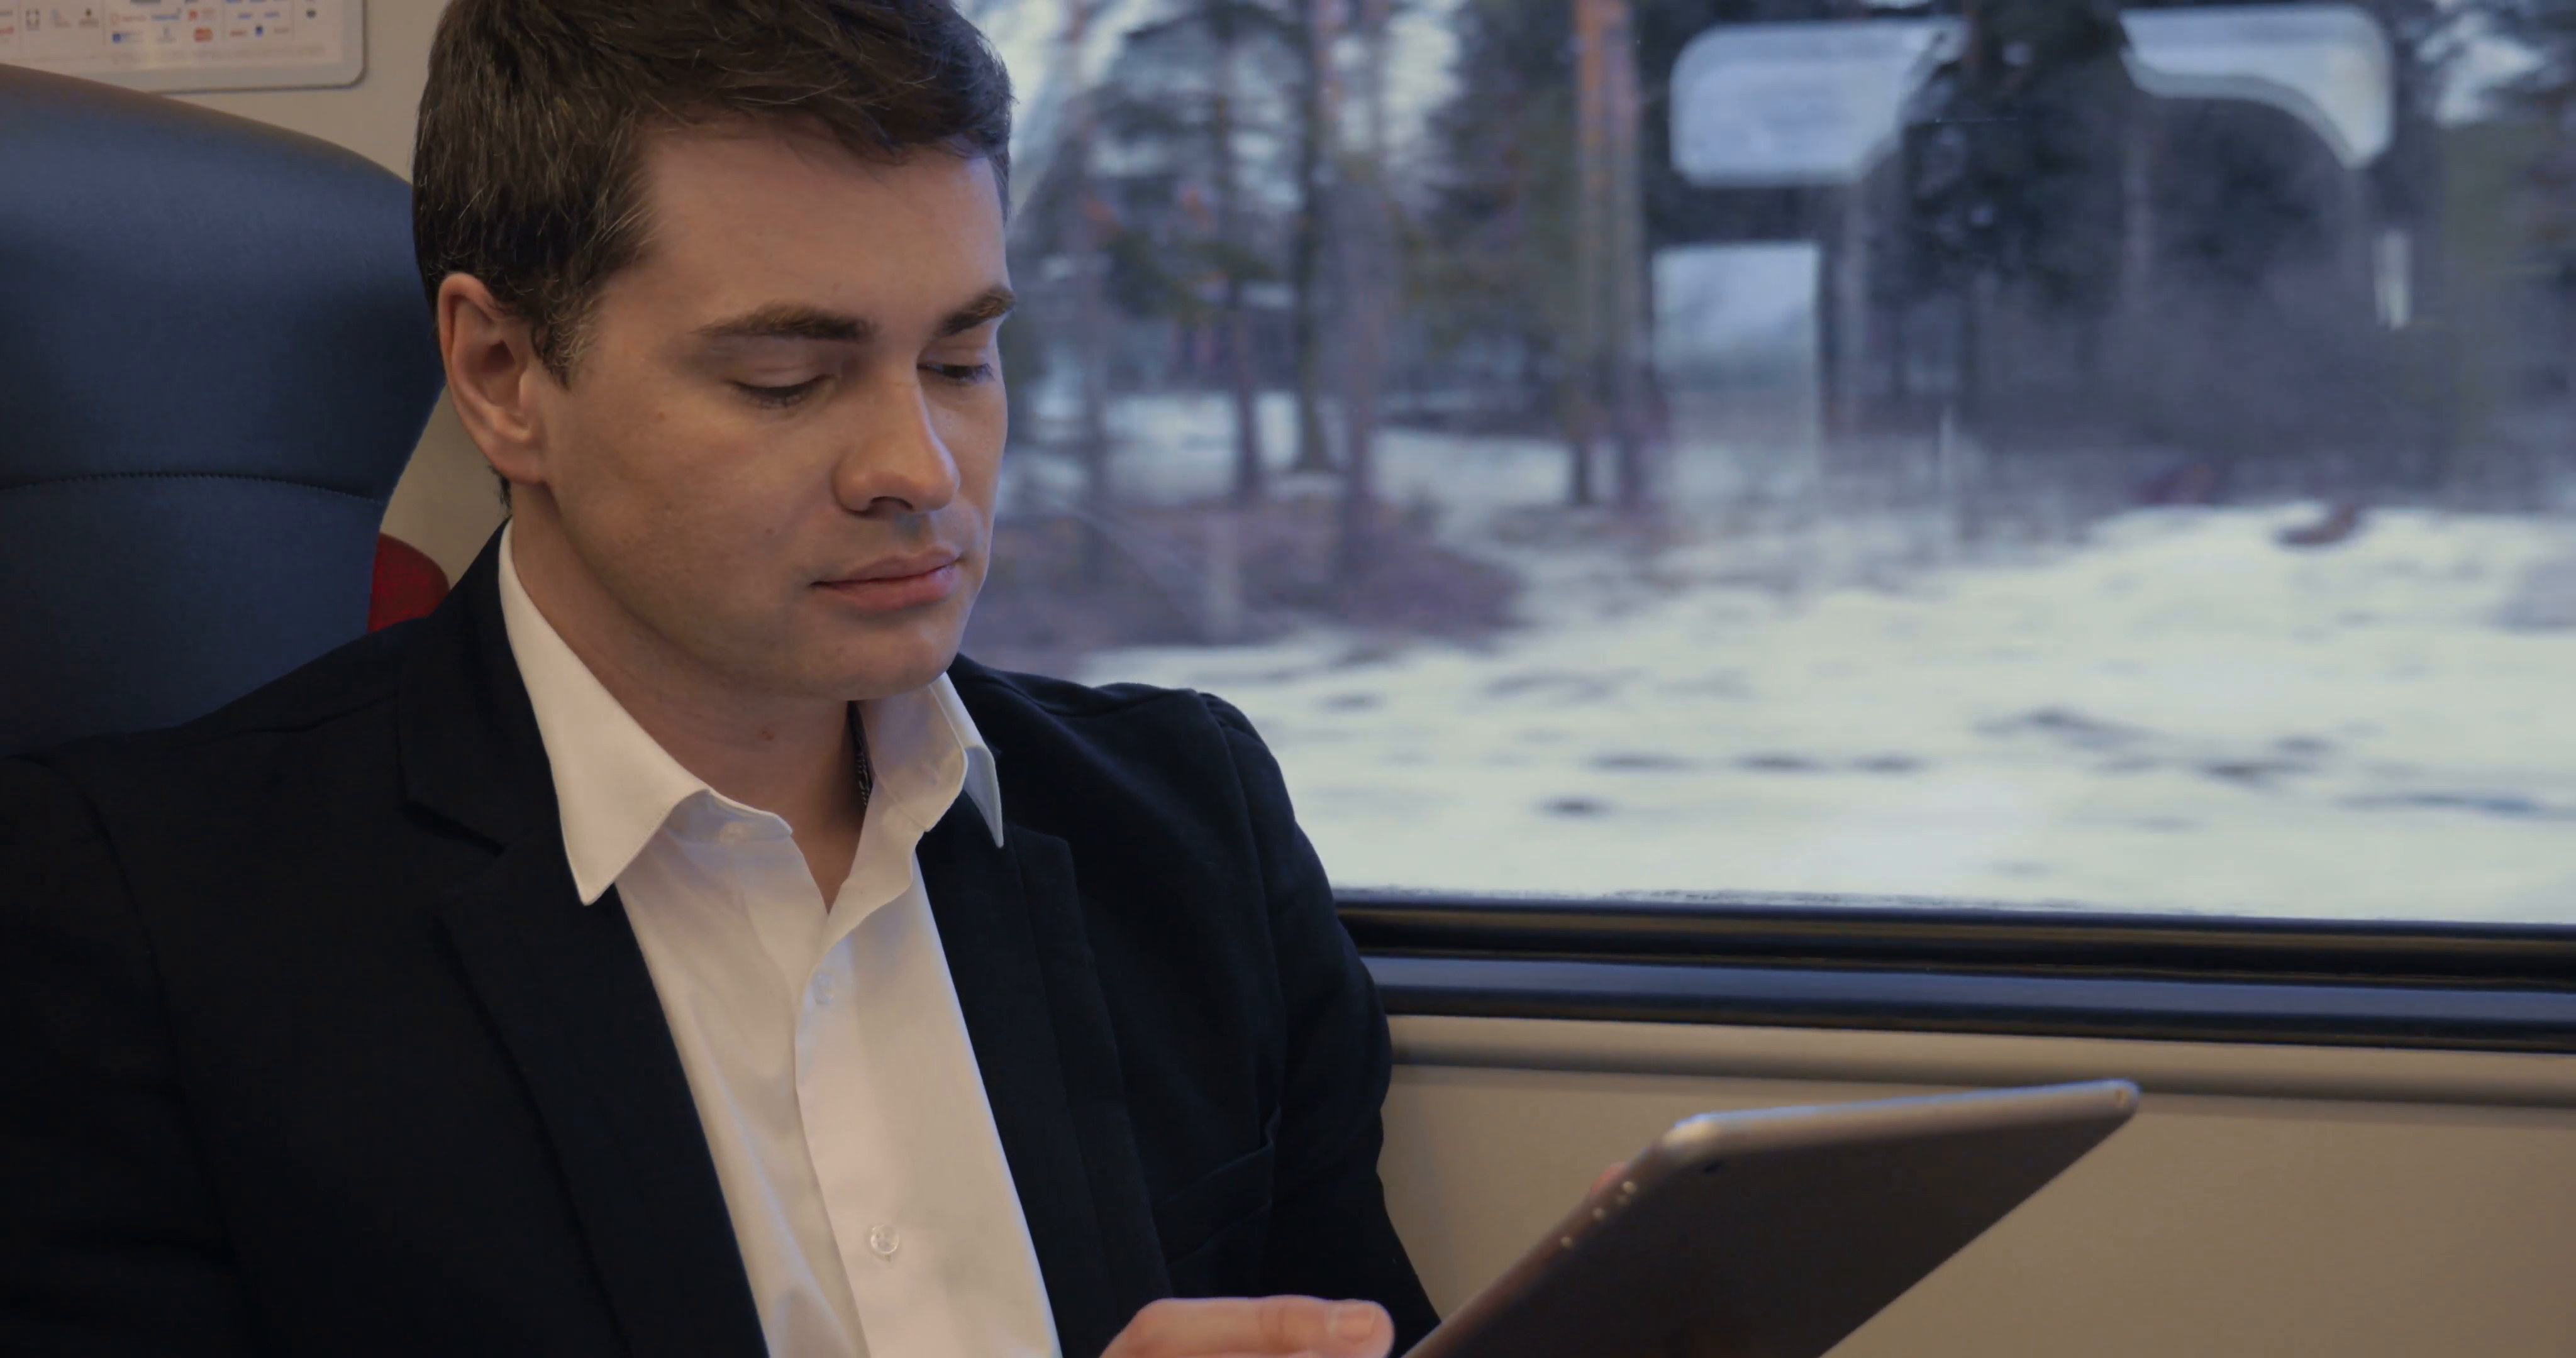 A man in the train watching movies on his tablet